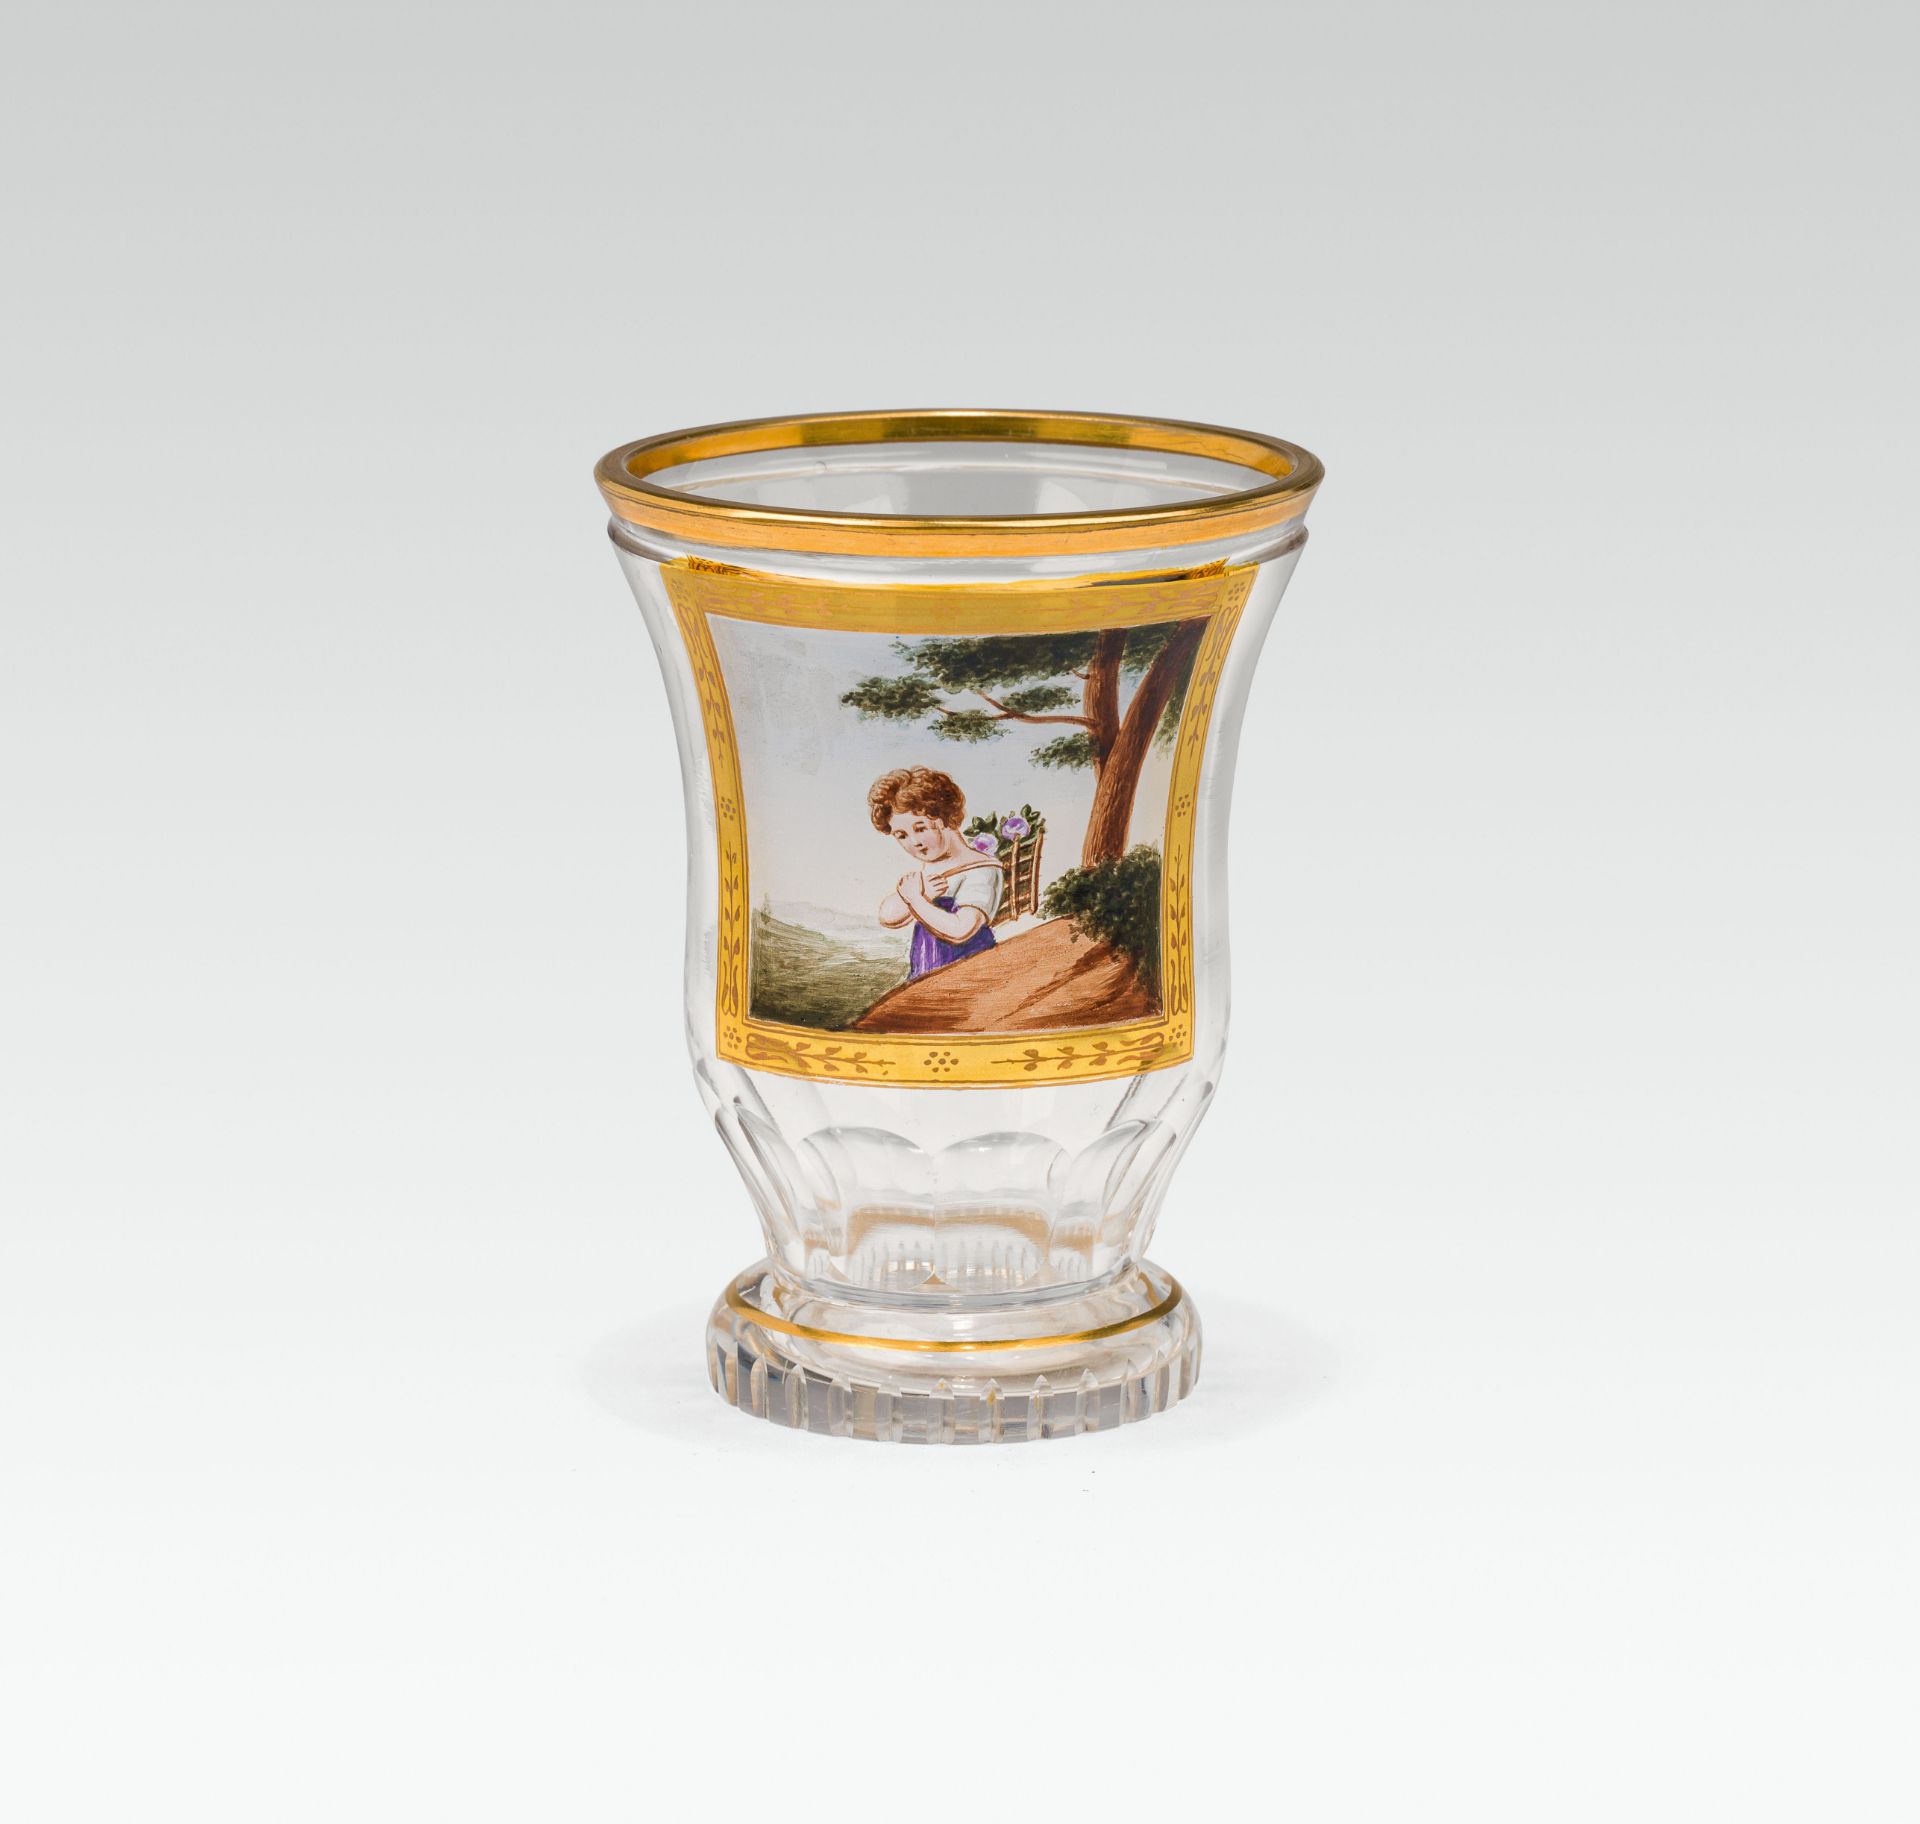 in the manner of Anton KothgasserBeaker "Blumenmädchen"colourless glass, gold and transparent